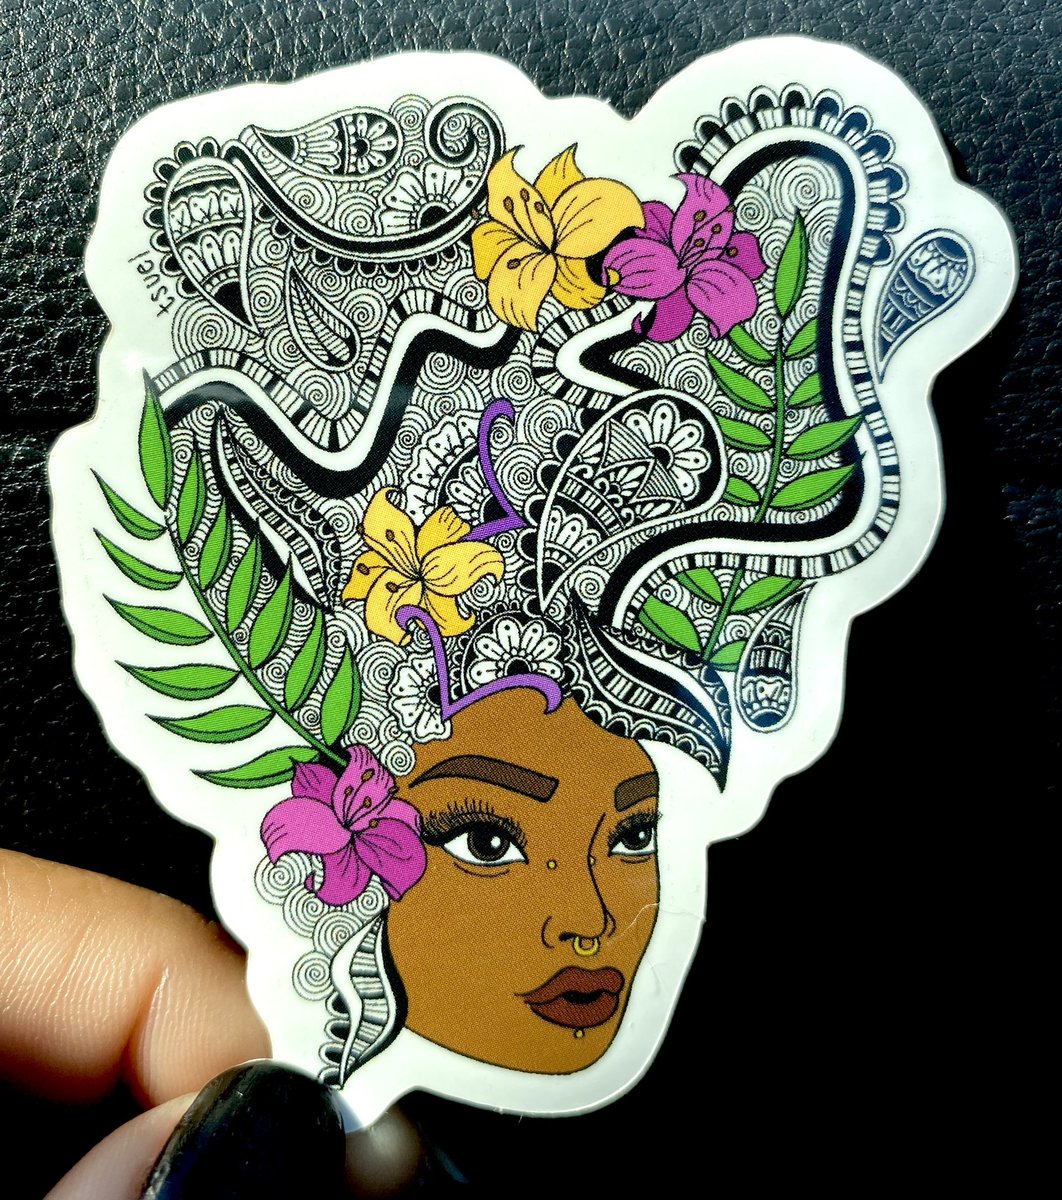 Also check out my art too! Prints + stickers available  http://www.artbytsuel.bigcartel.com 